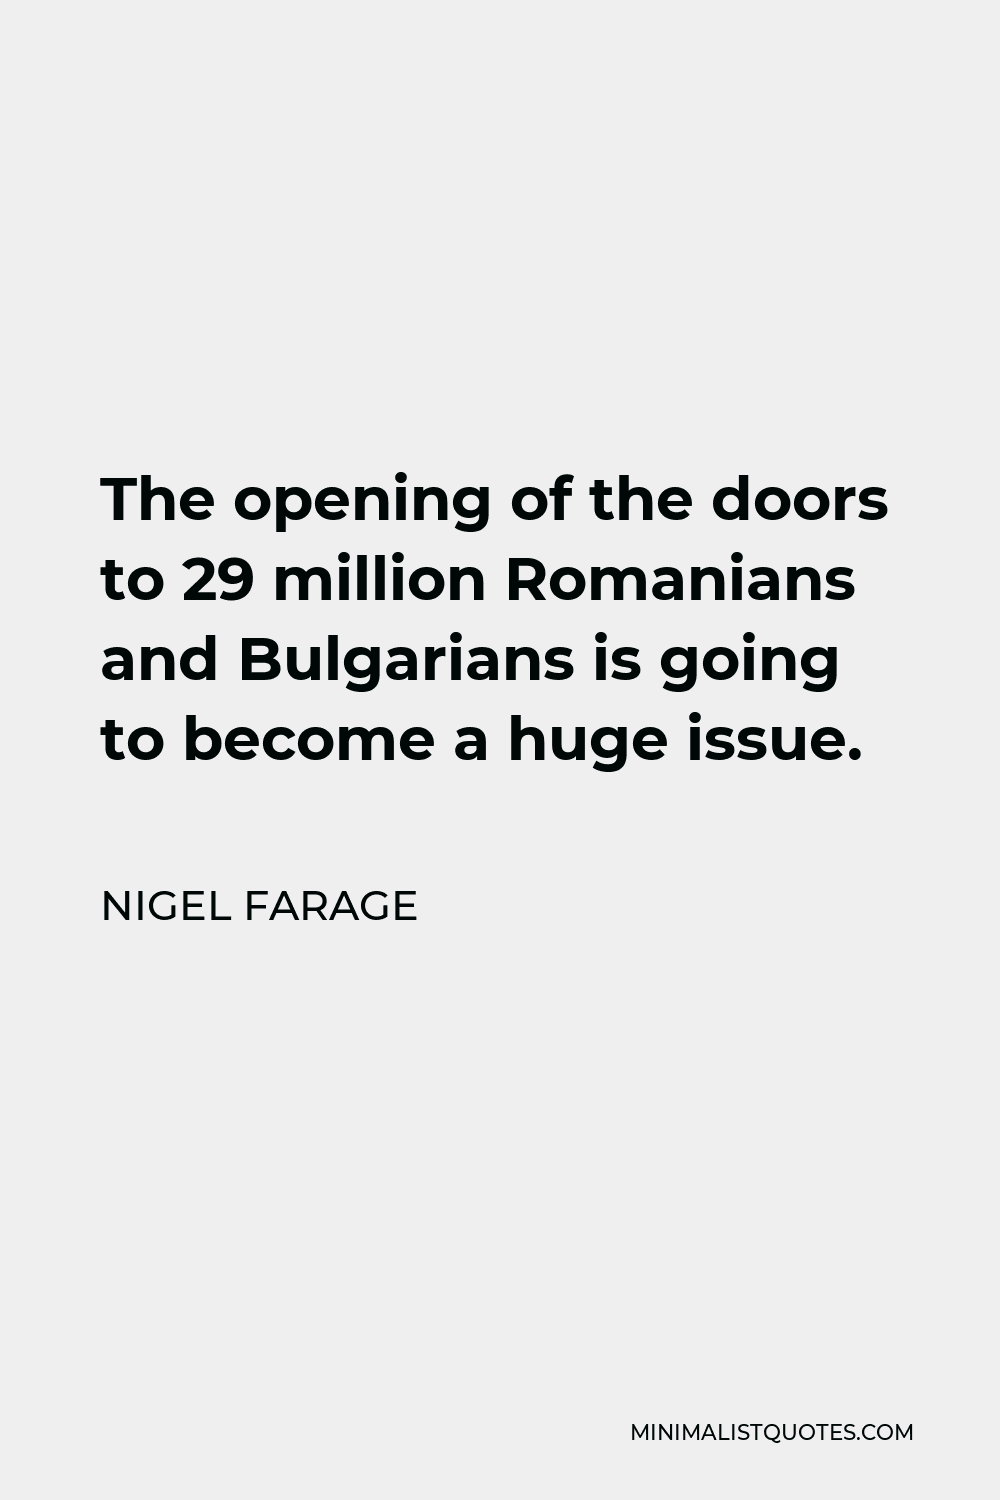 Nigel Farage Quote - The opening of the doors to 29 million Romanians and Bulgarians is going to become a huge issue.